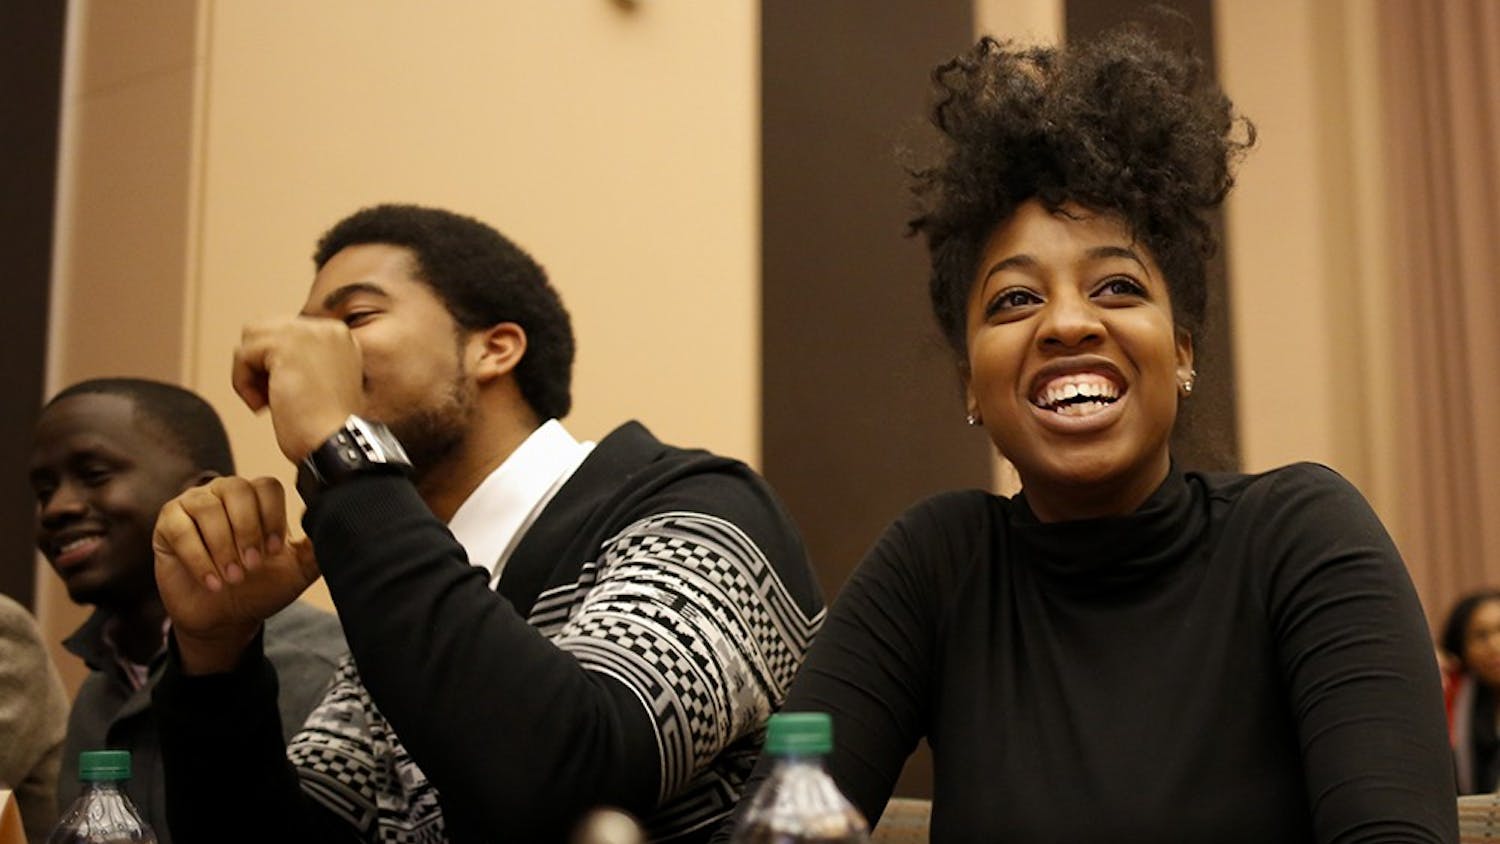 Senior Isaiah Sloss, left, and senior Aaryn Eady,right, smile after their team "High Purpose" win the Black Knowledge Bowl event Wednesday at Neal-Marshall Black Culture Center. Black Knowledge Bowl is is an academically competitive program which tests student knowledge regarding the history and politics of African Americans in the United States, started in 1983. 